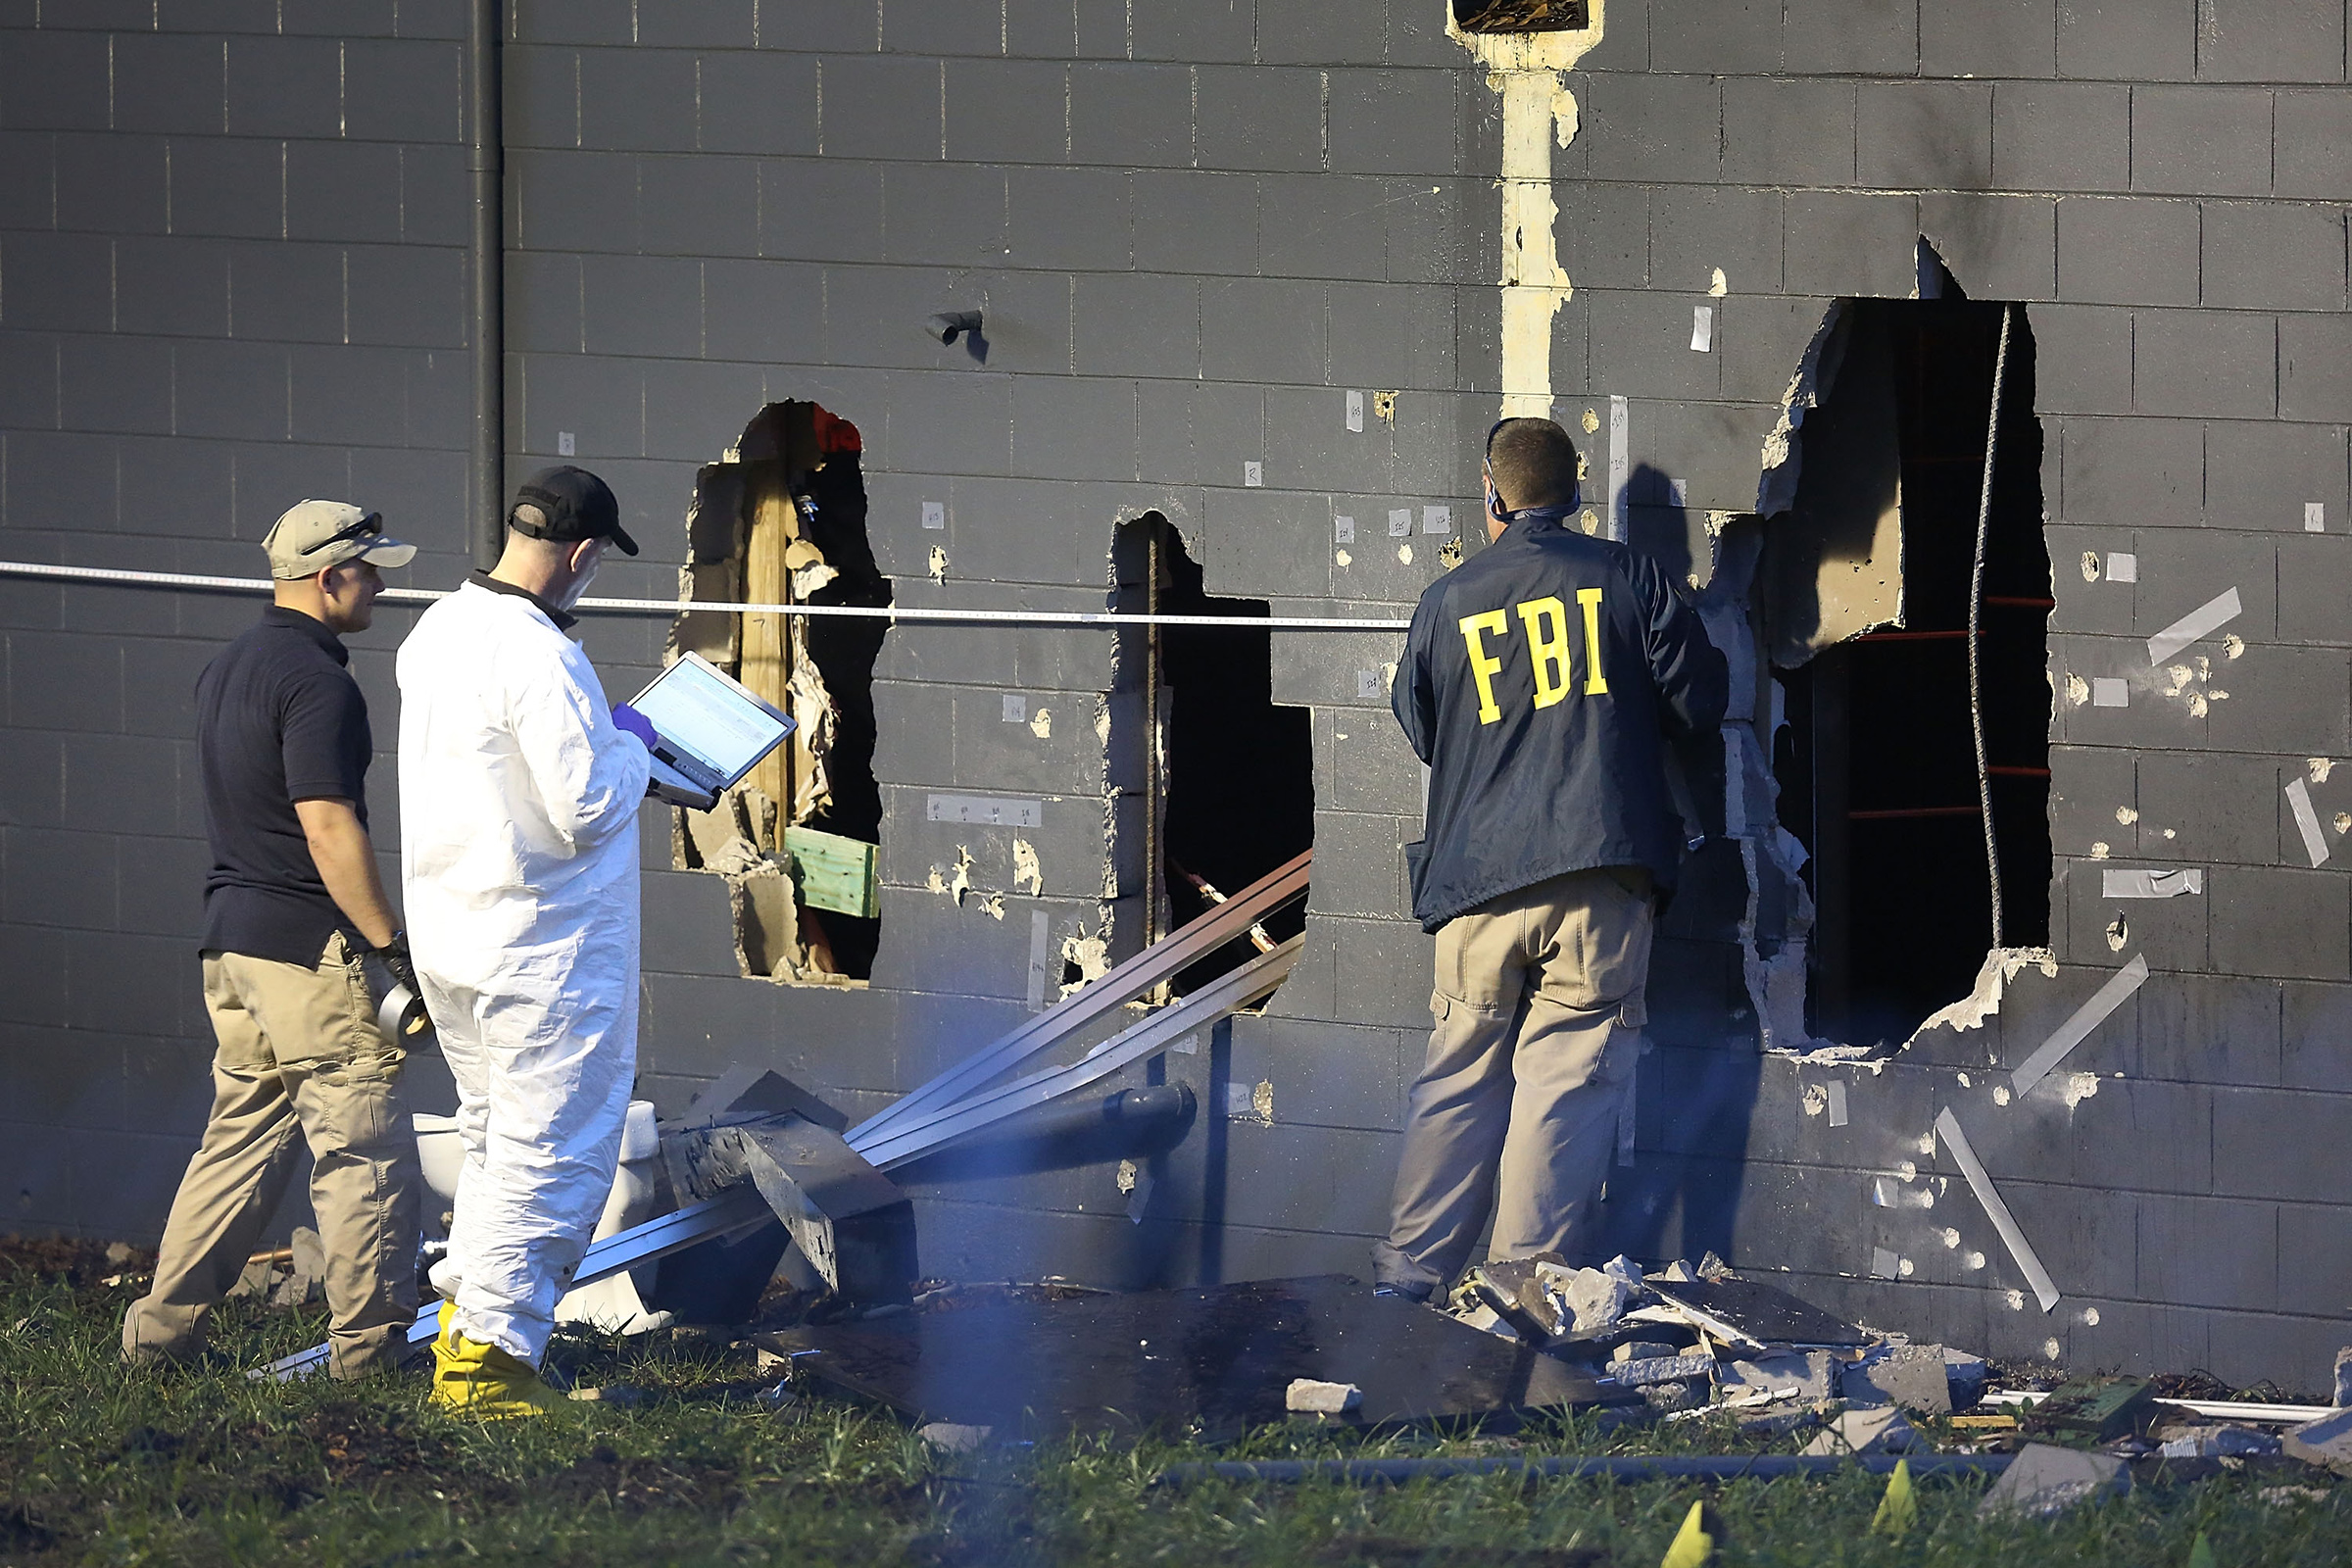 FBI agents investigate near the damaged rear wall of the Pulse Nightclub where Omar Mateen allegedly killed at least 50 people on June 12, 2016 in Orlando. (Joe Raedle—Getty Images)